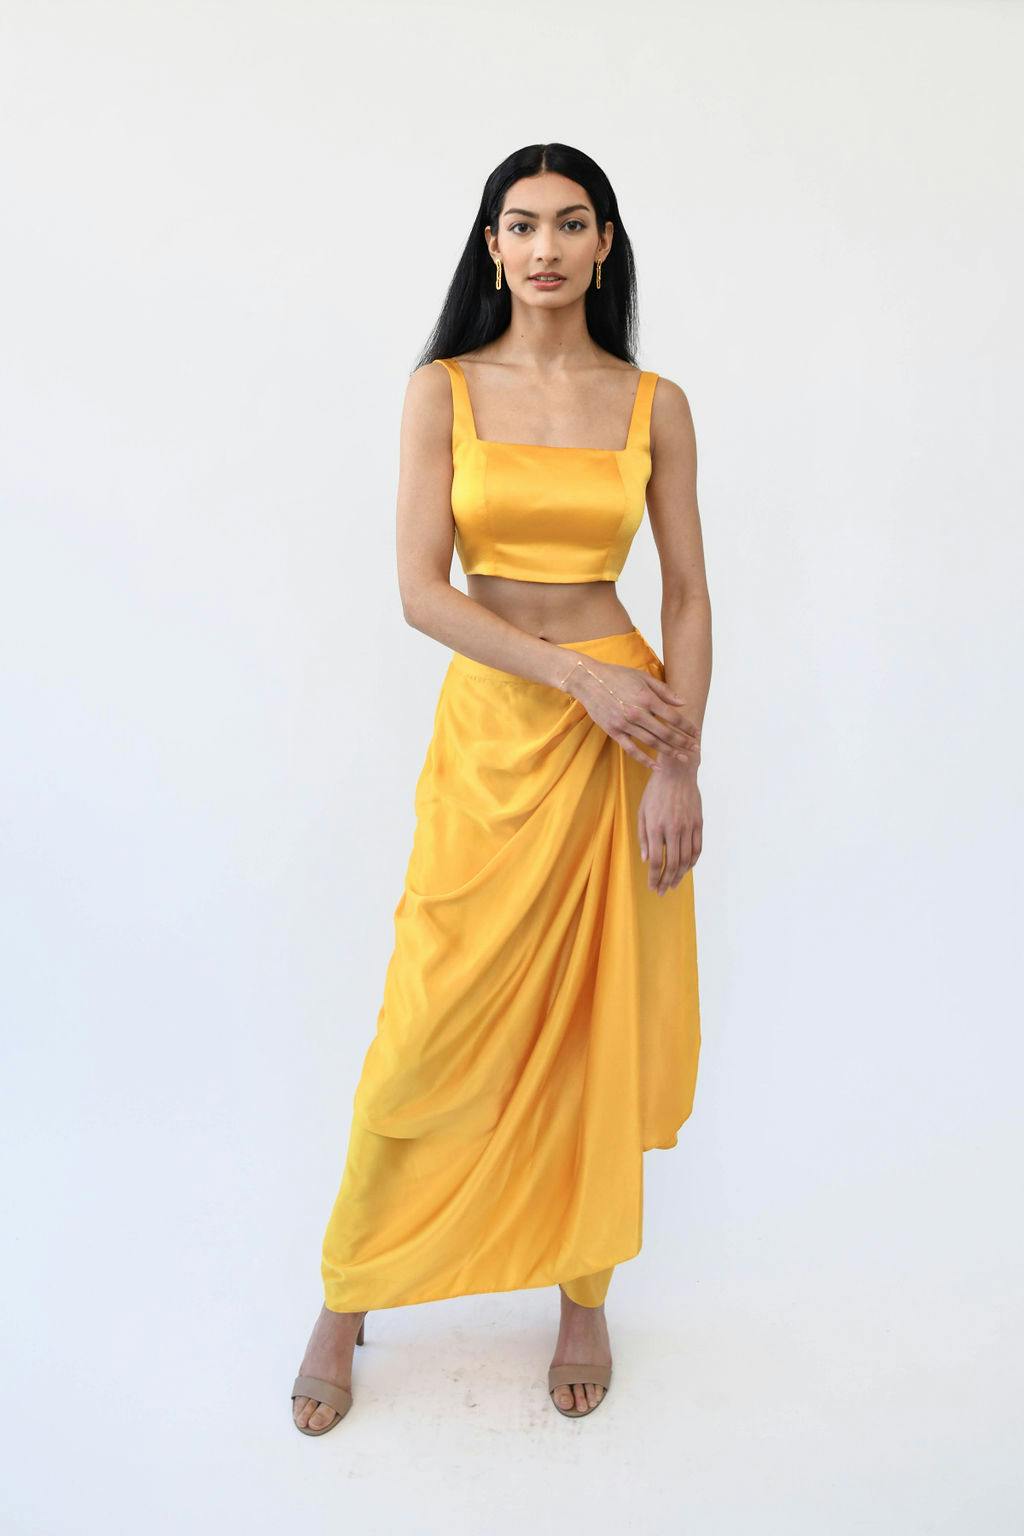 Mango Satin Drape Skirt & Blouse Set, a product by MOR Collections